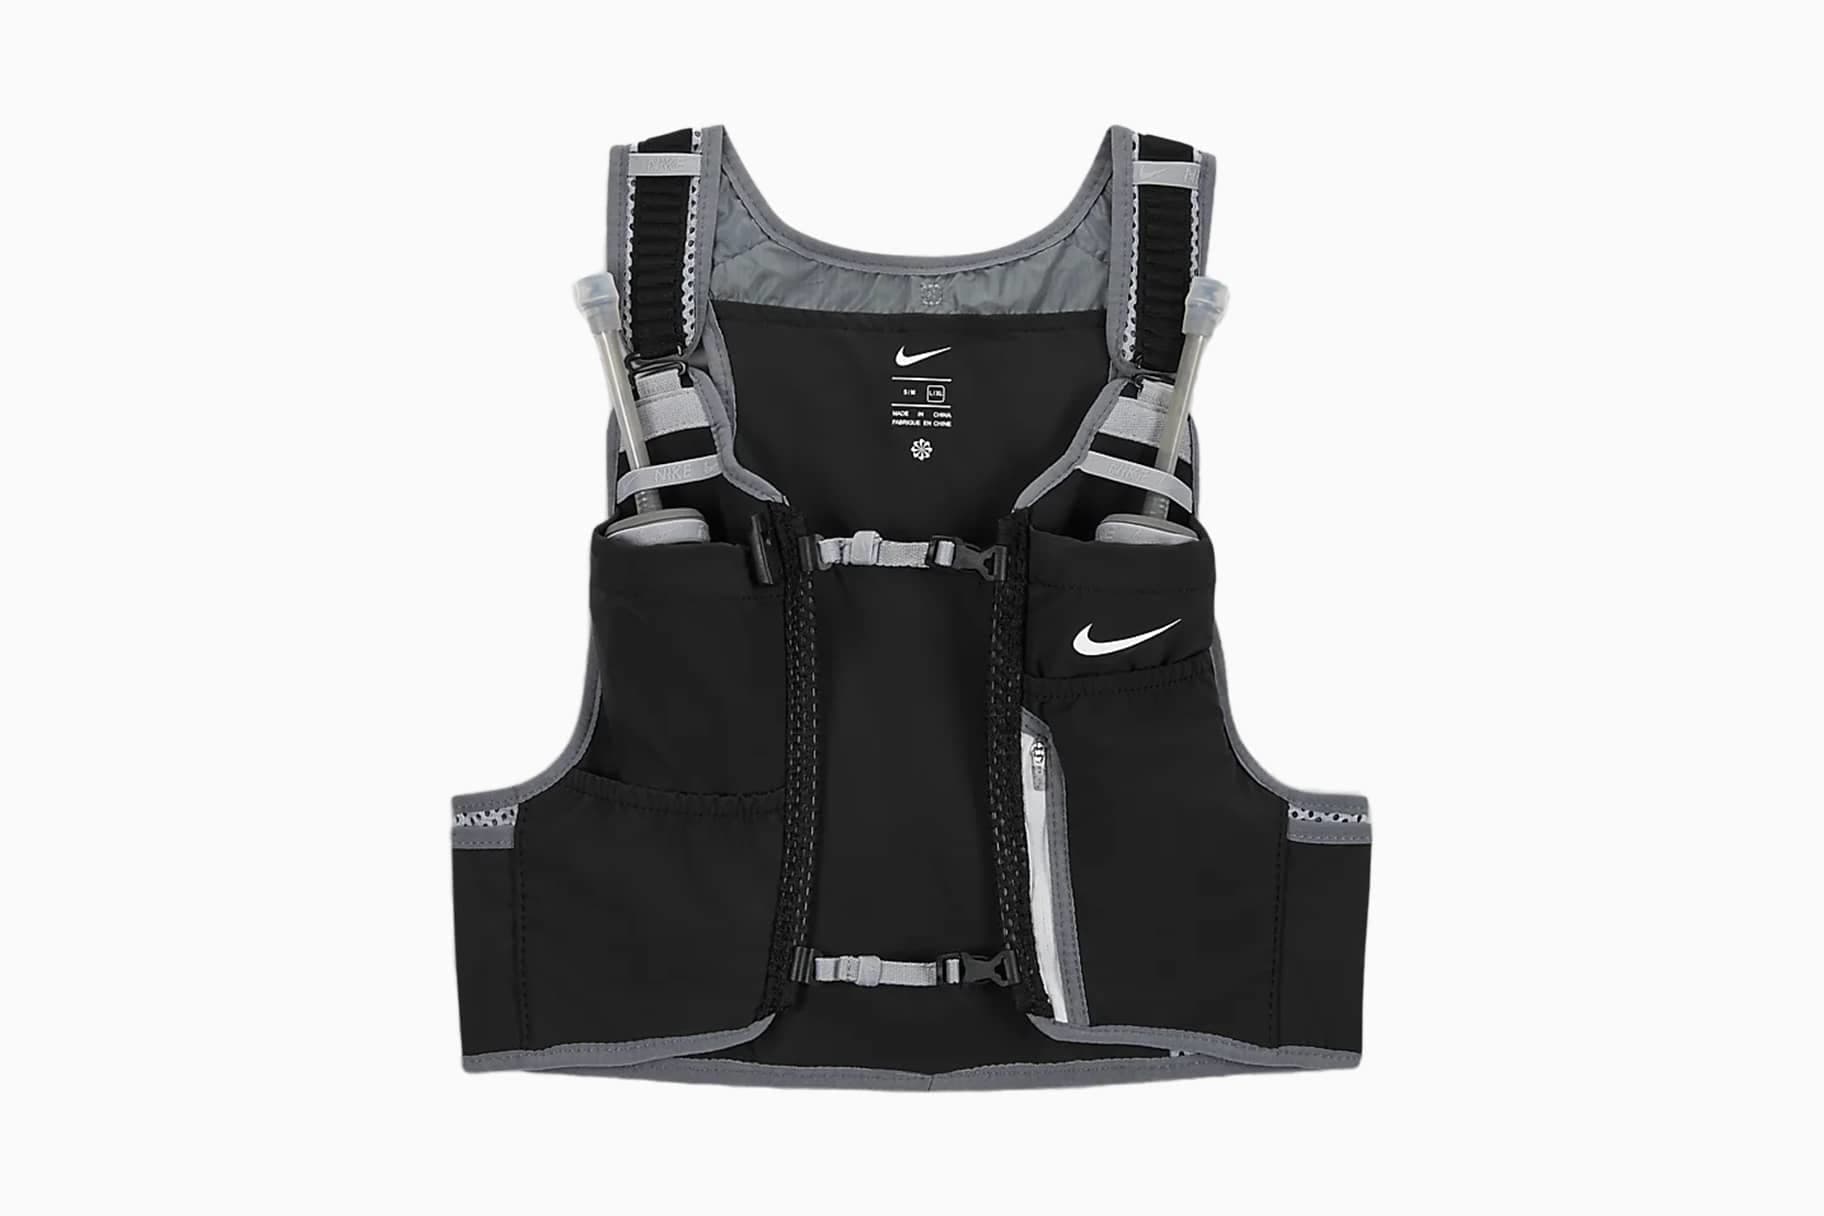 https://static.nike.com/a/images/f_auto,cs_srgb/w_1920,c_limit/e9a2495b-fc90-4b7d-aa8d-dadab35cf6ae/best-nike-running-hydration-belts-and-vests.jpg